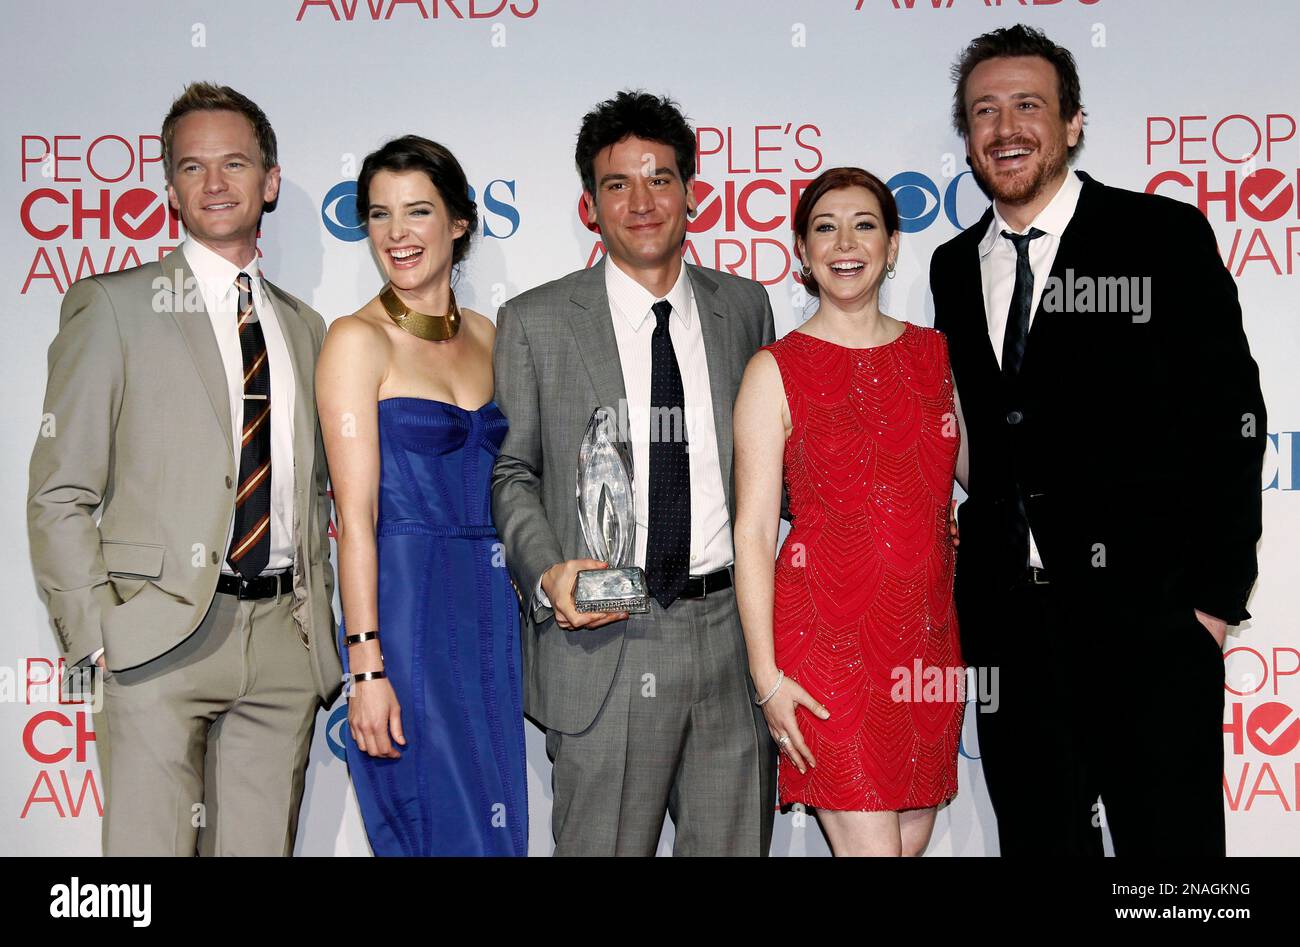 From left, Neil Patrick Harris, Cobie Smulders, Josh Radner, Alyson  Hannigan, and Jason Segel pose backstage with the award for favorite  network TV comedy for "How I Met Your Mother" at the